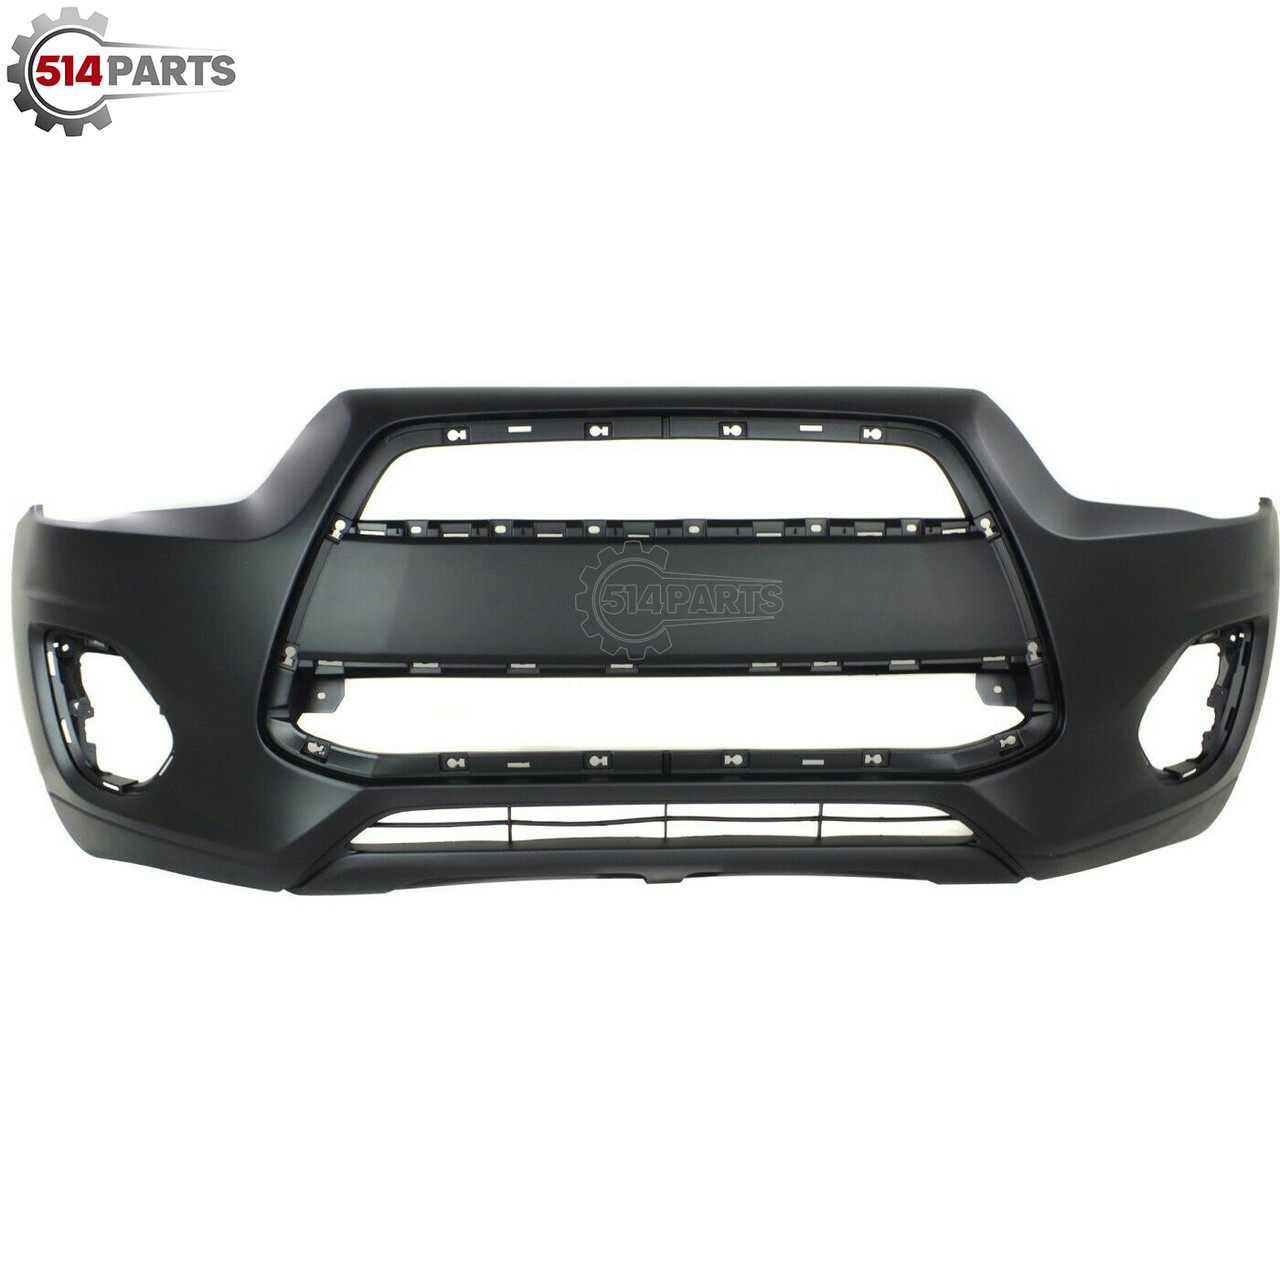 2013 - 2015 MITSUBISHI OUTLANDER SPORT FRONT BUMPER with TEXTURED LOWER AREA - PARE-CHOC AVANT avec ZONE INFERIEURE TEXTUREE